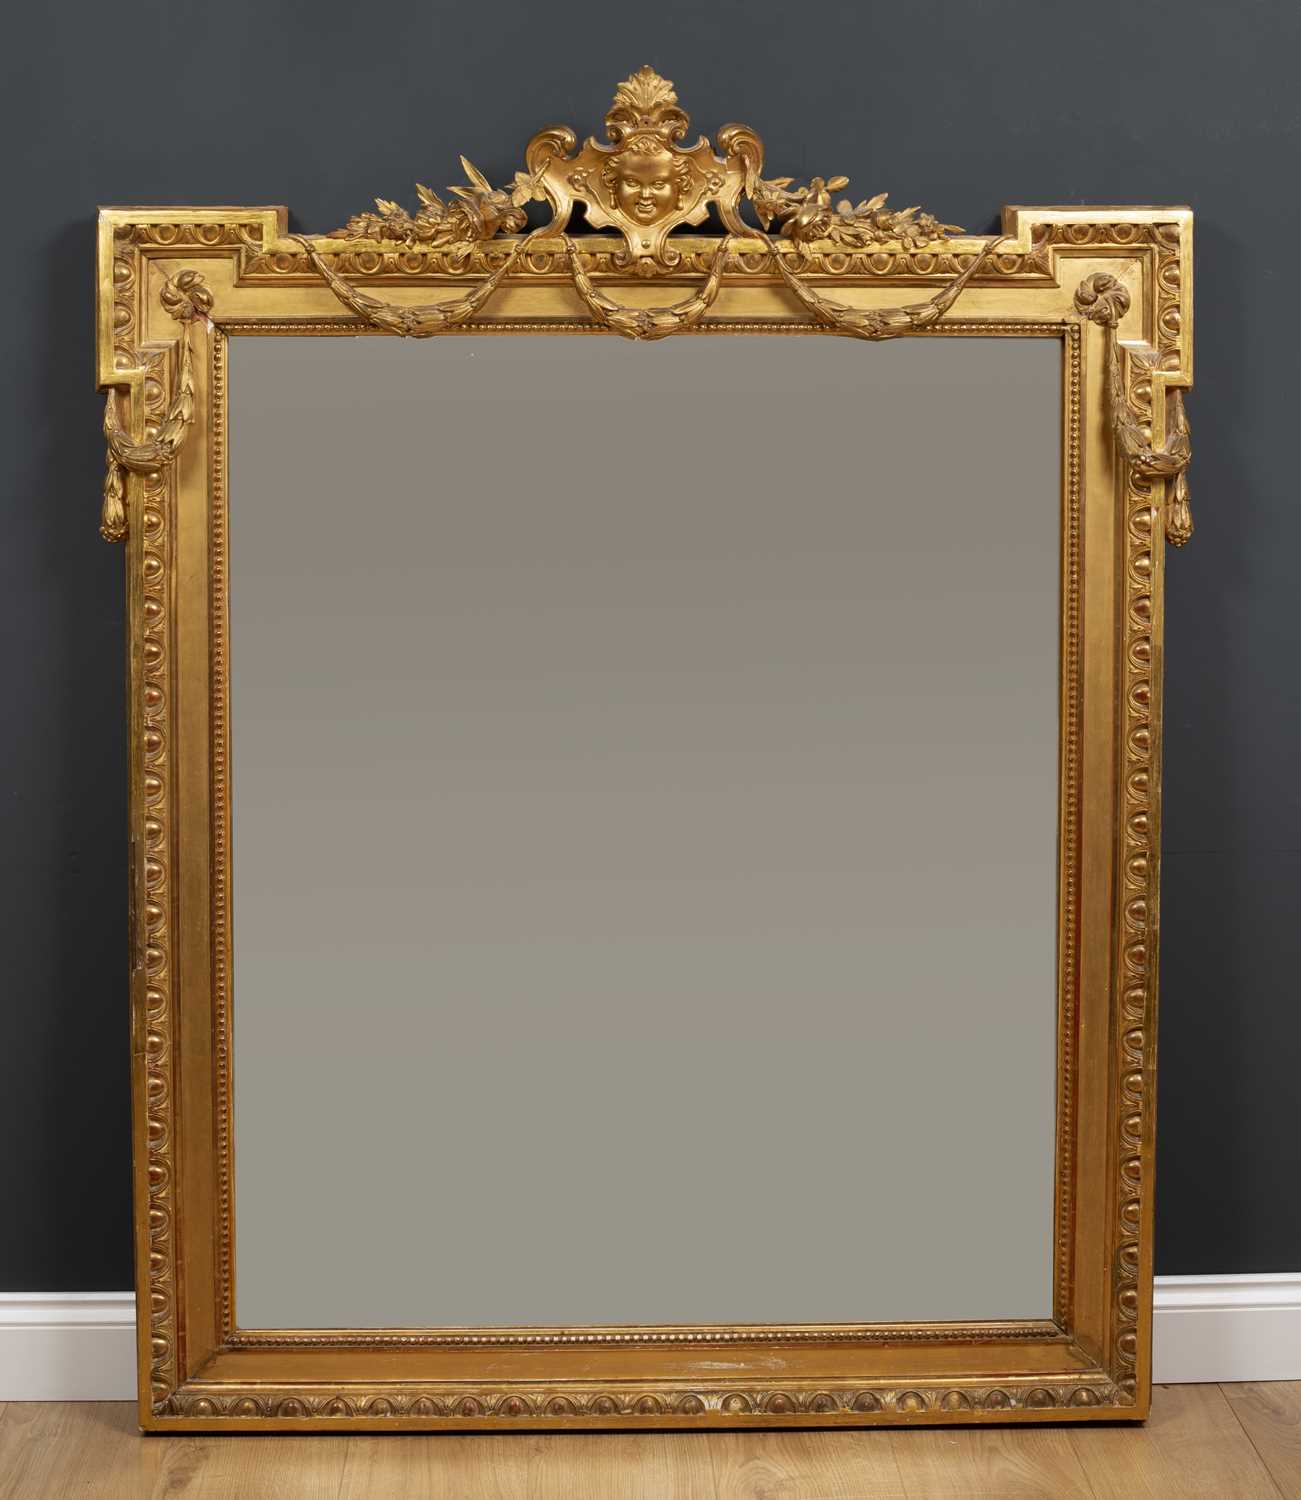 A 19th century gilt wall mirror with outset upper corners and central mask crest with floral and